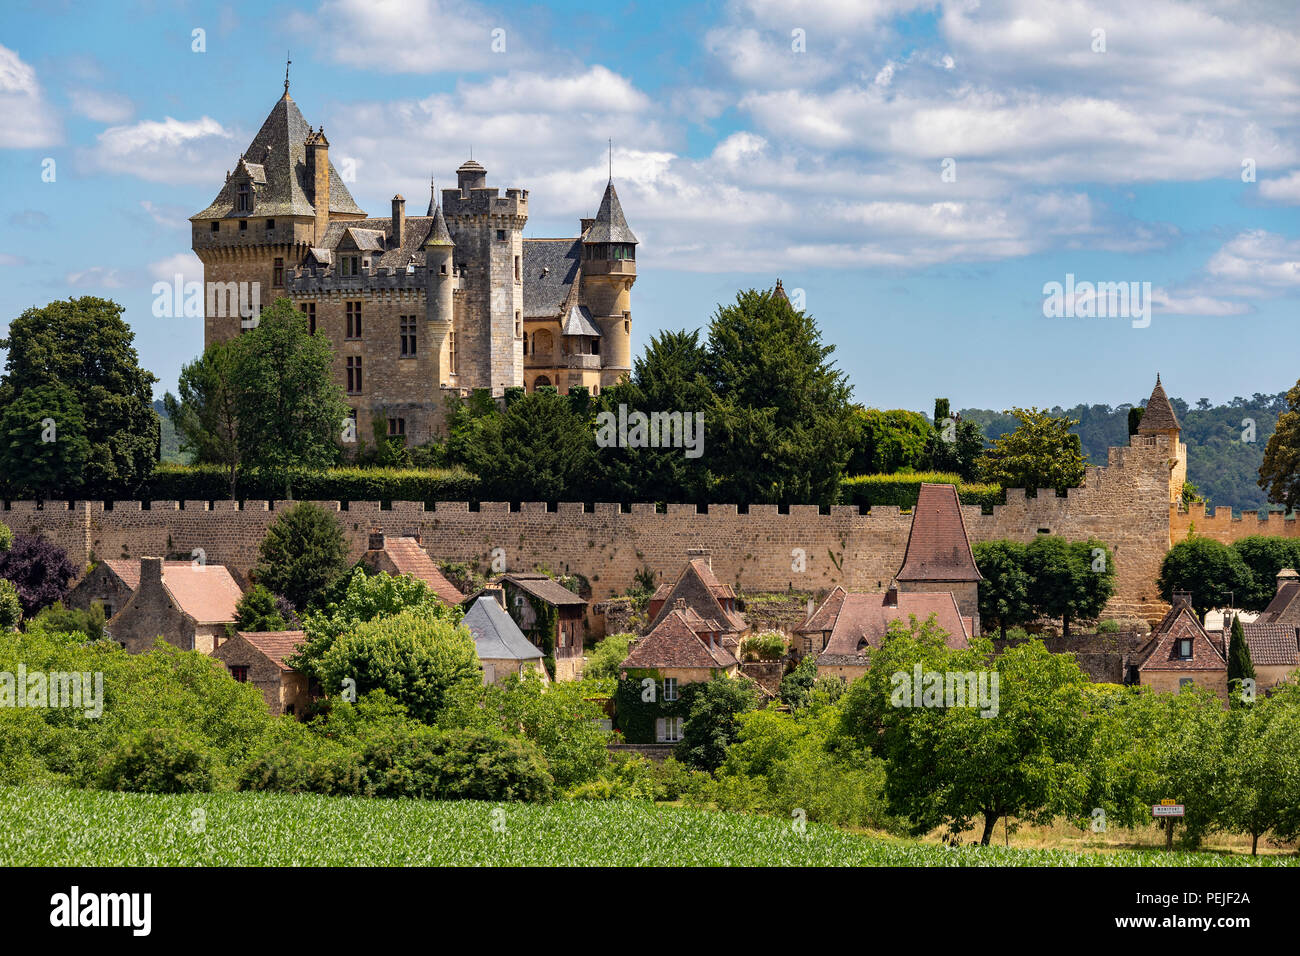 Chateau de Montfort - a castle in the French commune of Vitrac in the Dordogne region of France Stock Photo